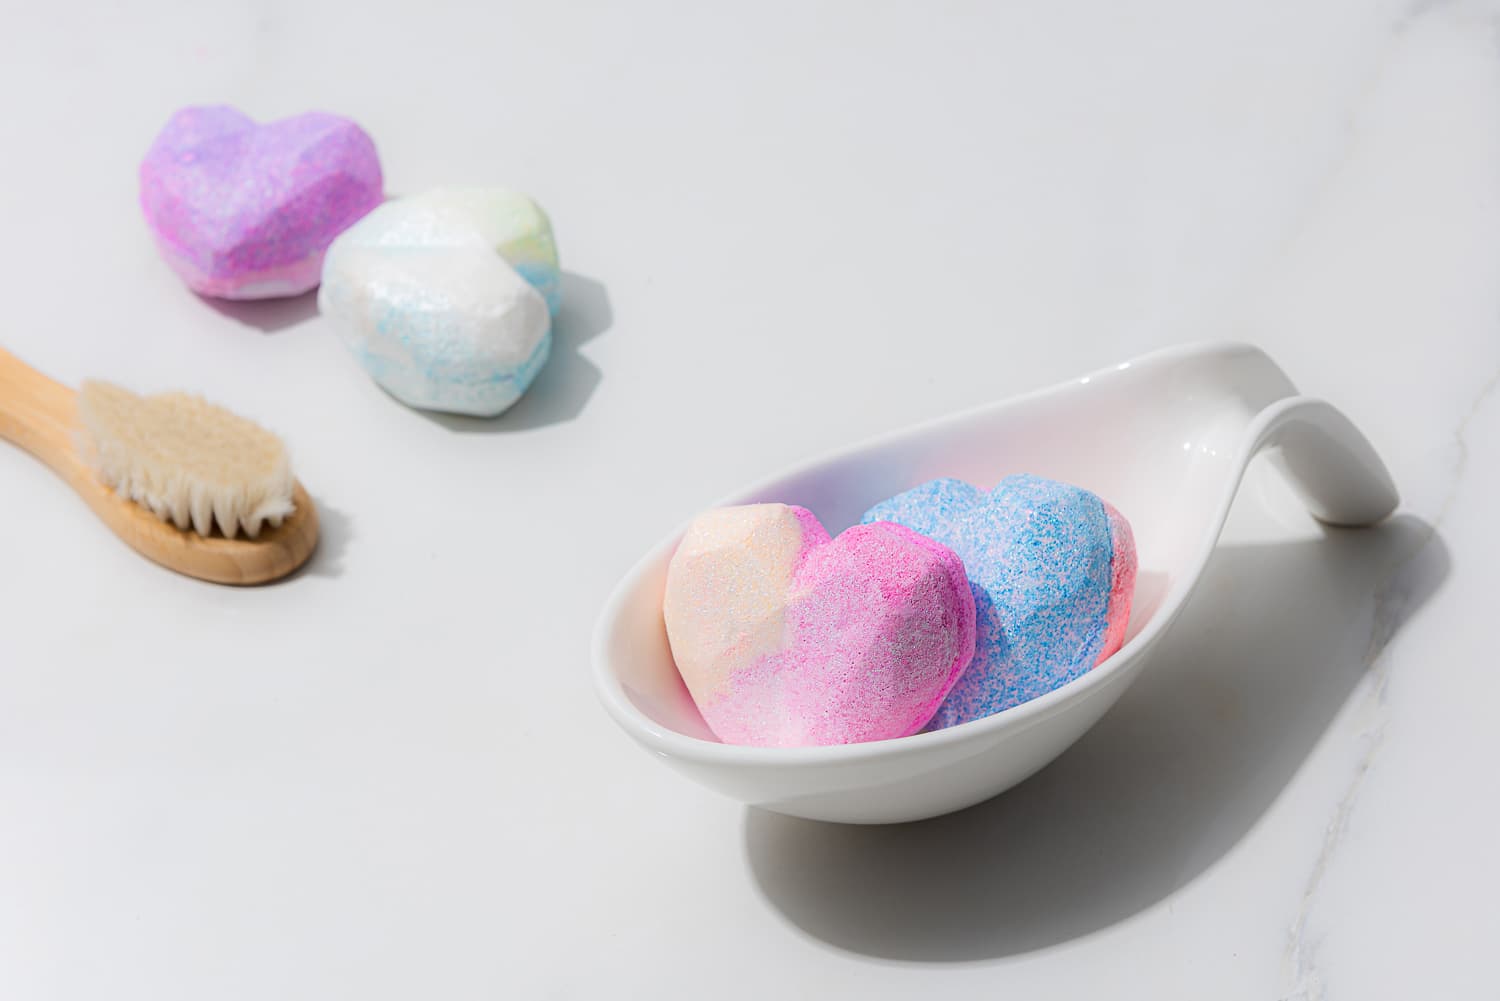 Best Quality Bath Bomb Made In Korea Hypoallergenic 0_0_ Organic Bath Bomb Natural Extracts